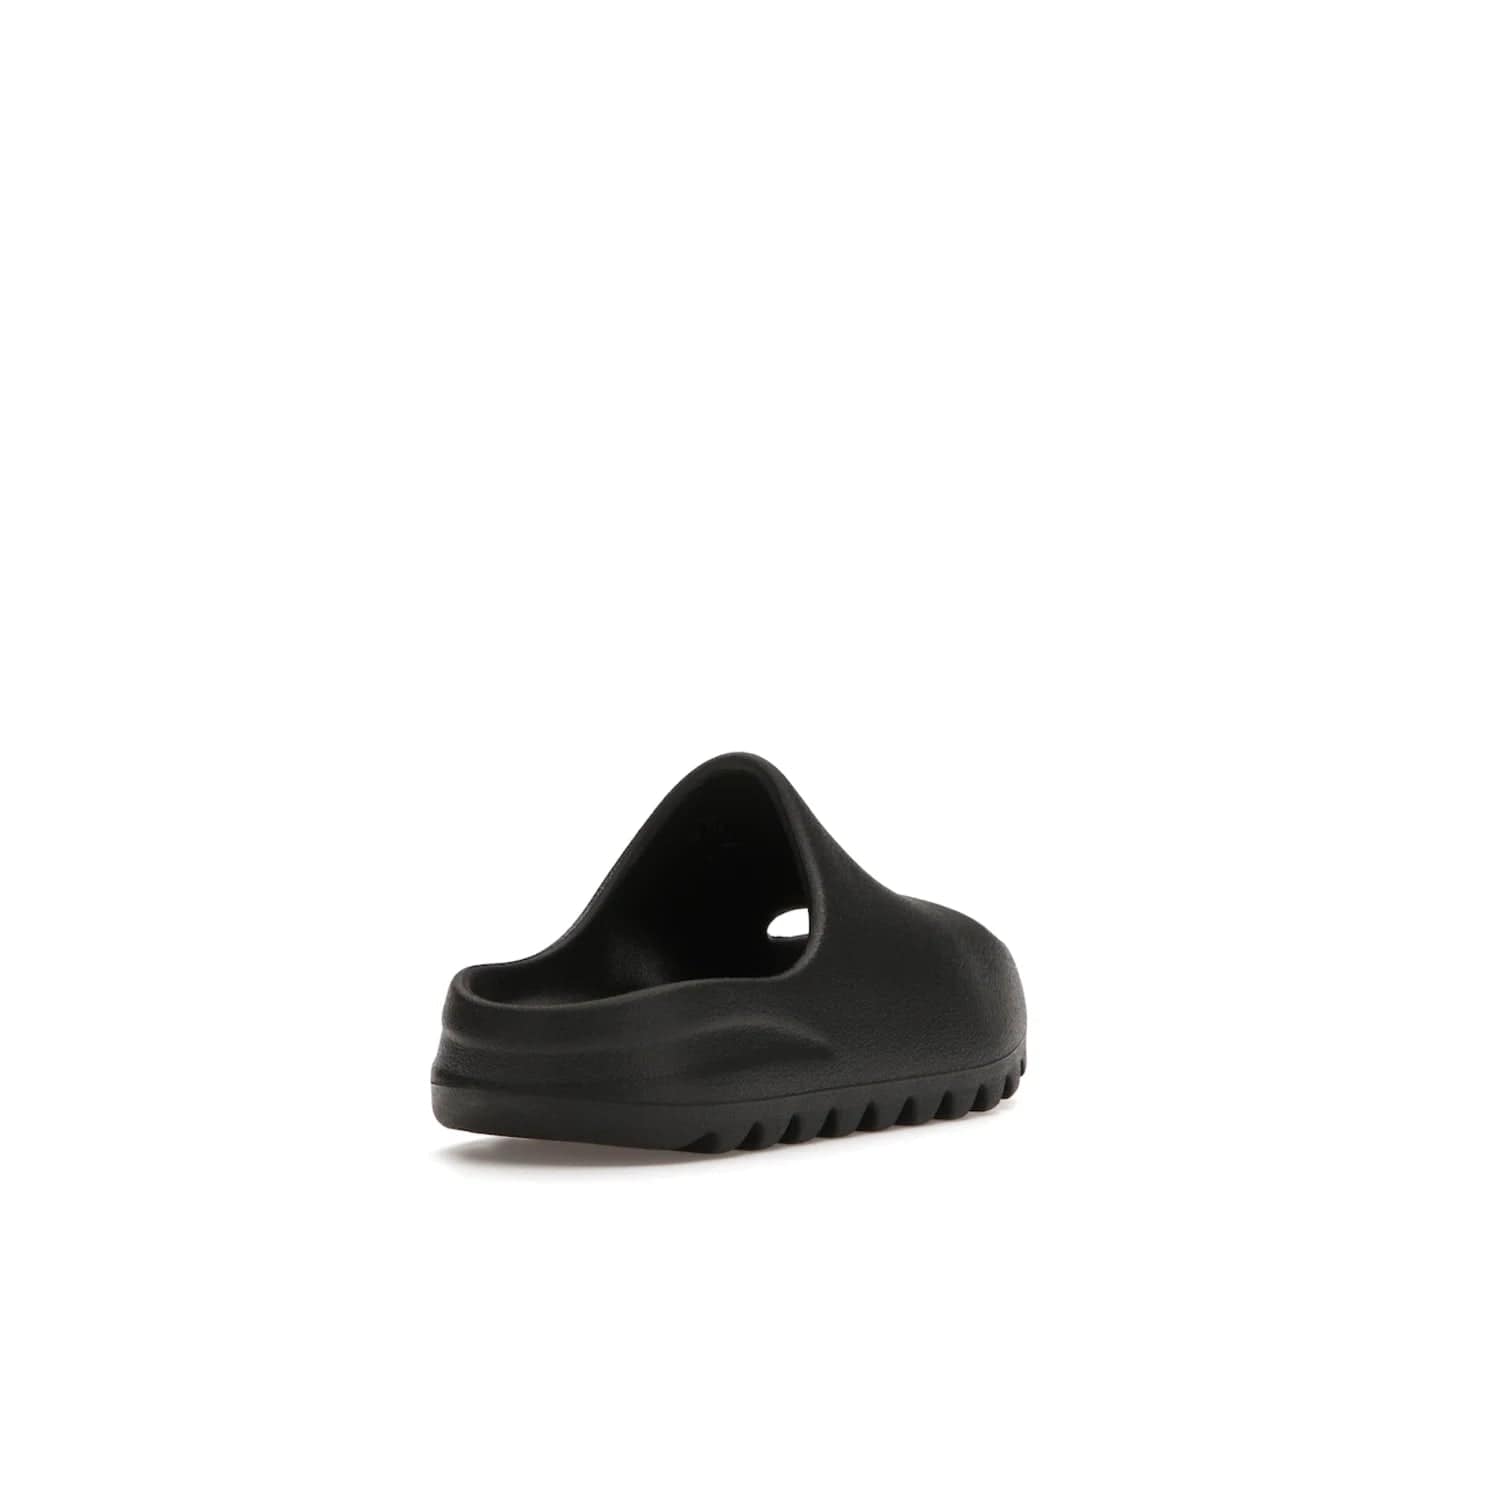 adidas Yeezy Slide Onyx (Kids) - Image 31 - Only at www.BallersClubKickz.com - adidas Yeezy Slide Onyx (Kids): Comfortable foam construction with textured surface and iconic three-stripe logo. Breathable, open-toe design and deep grooves for traction. Released in March 2021 at $50.